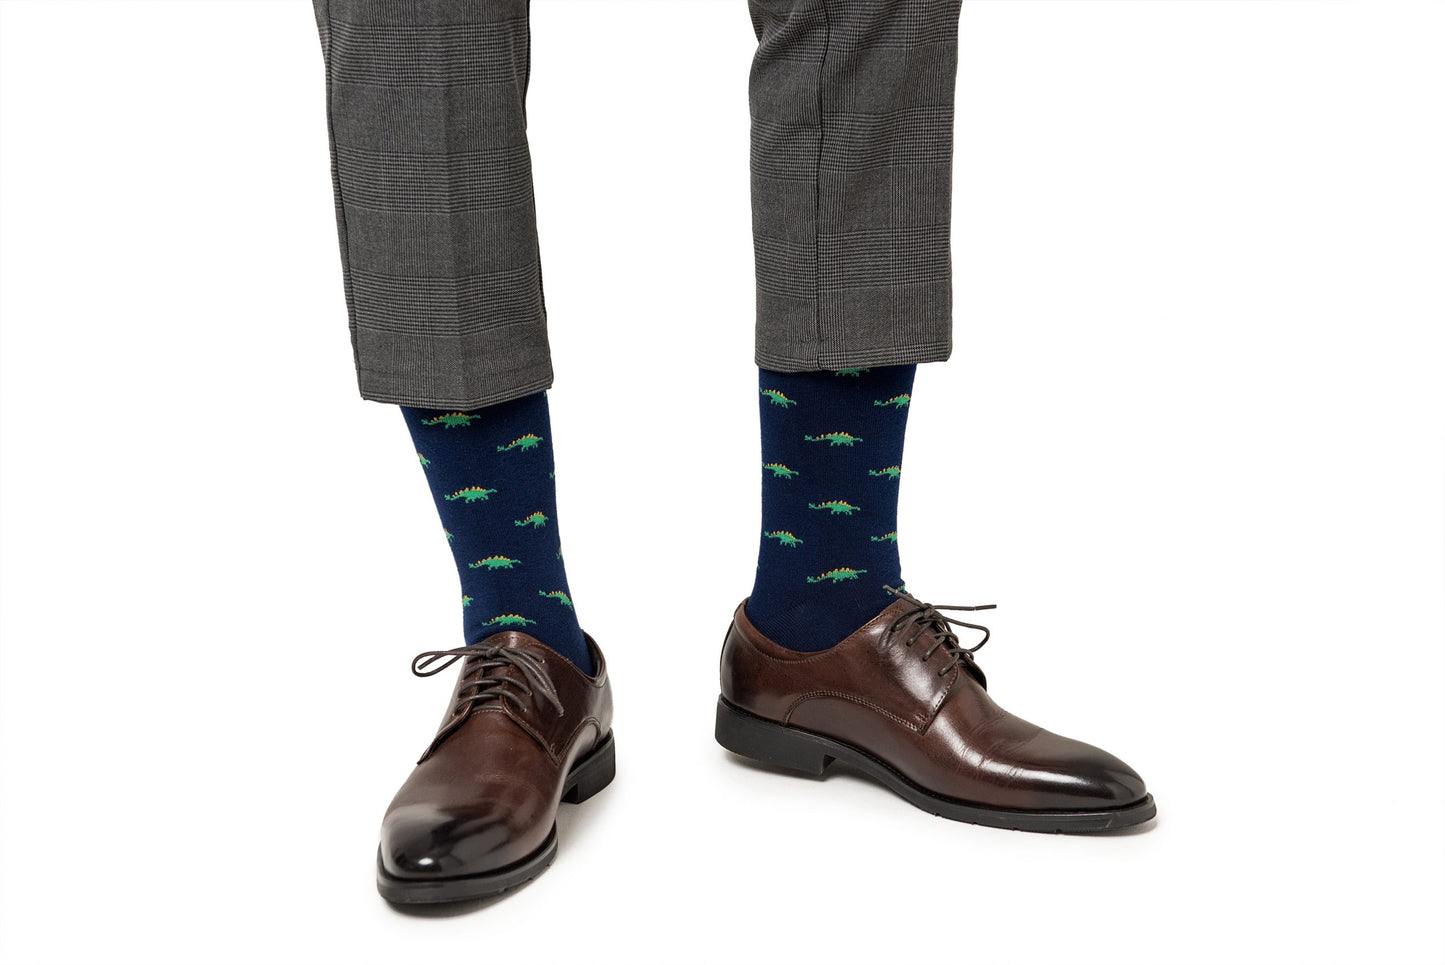 A person wearing brown dress shoes and Stegosaurus Socks adorned with whimsical green dinosaur patterns, paired with grey trousers.